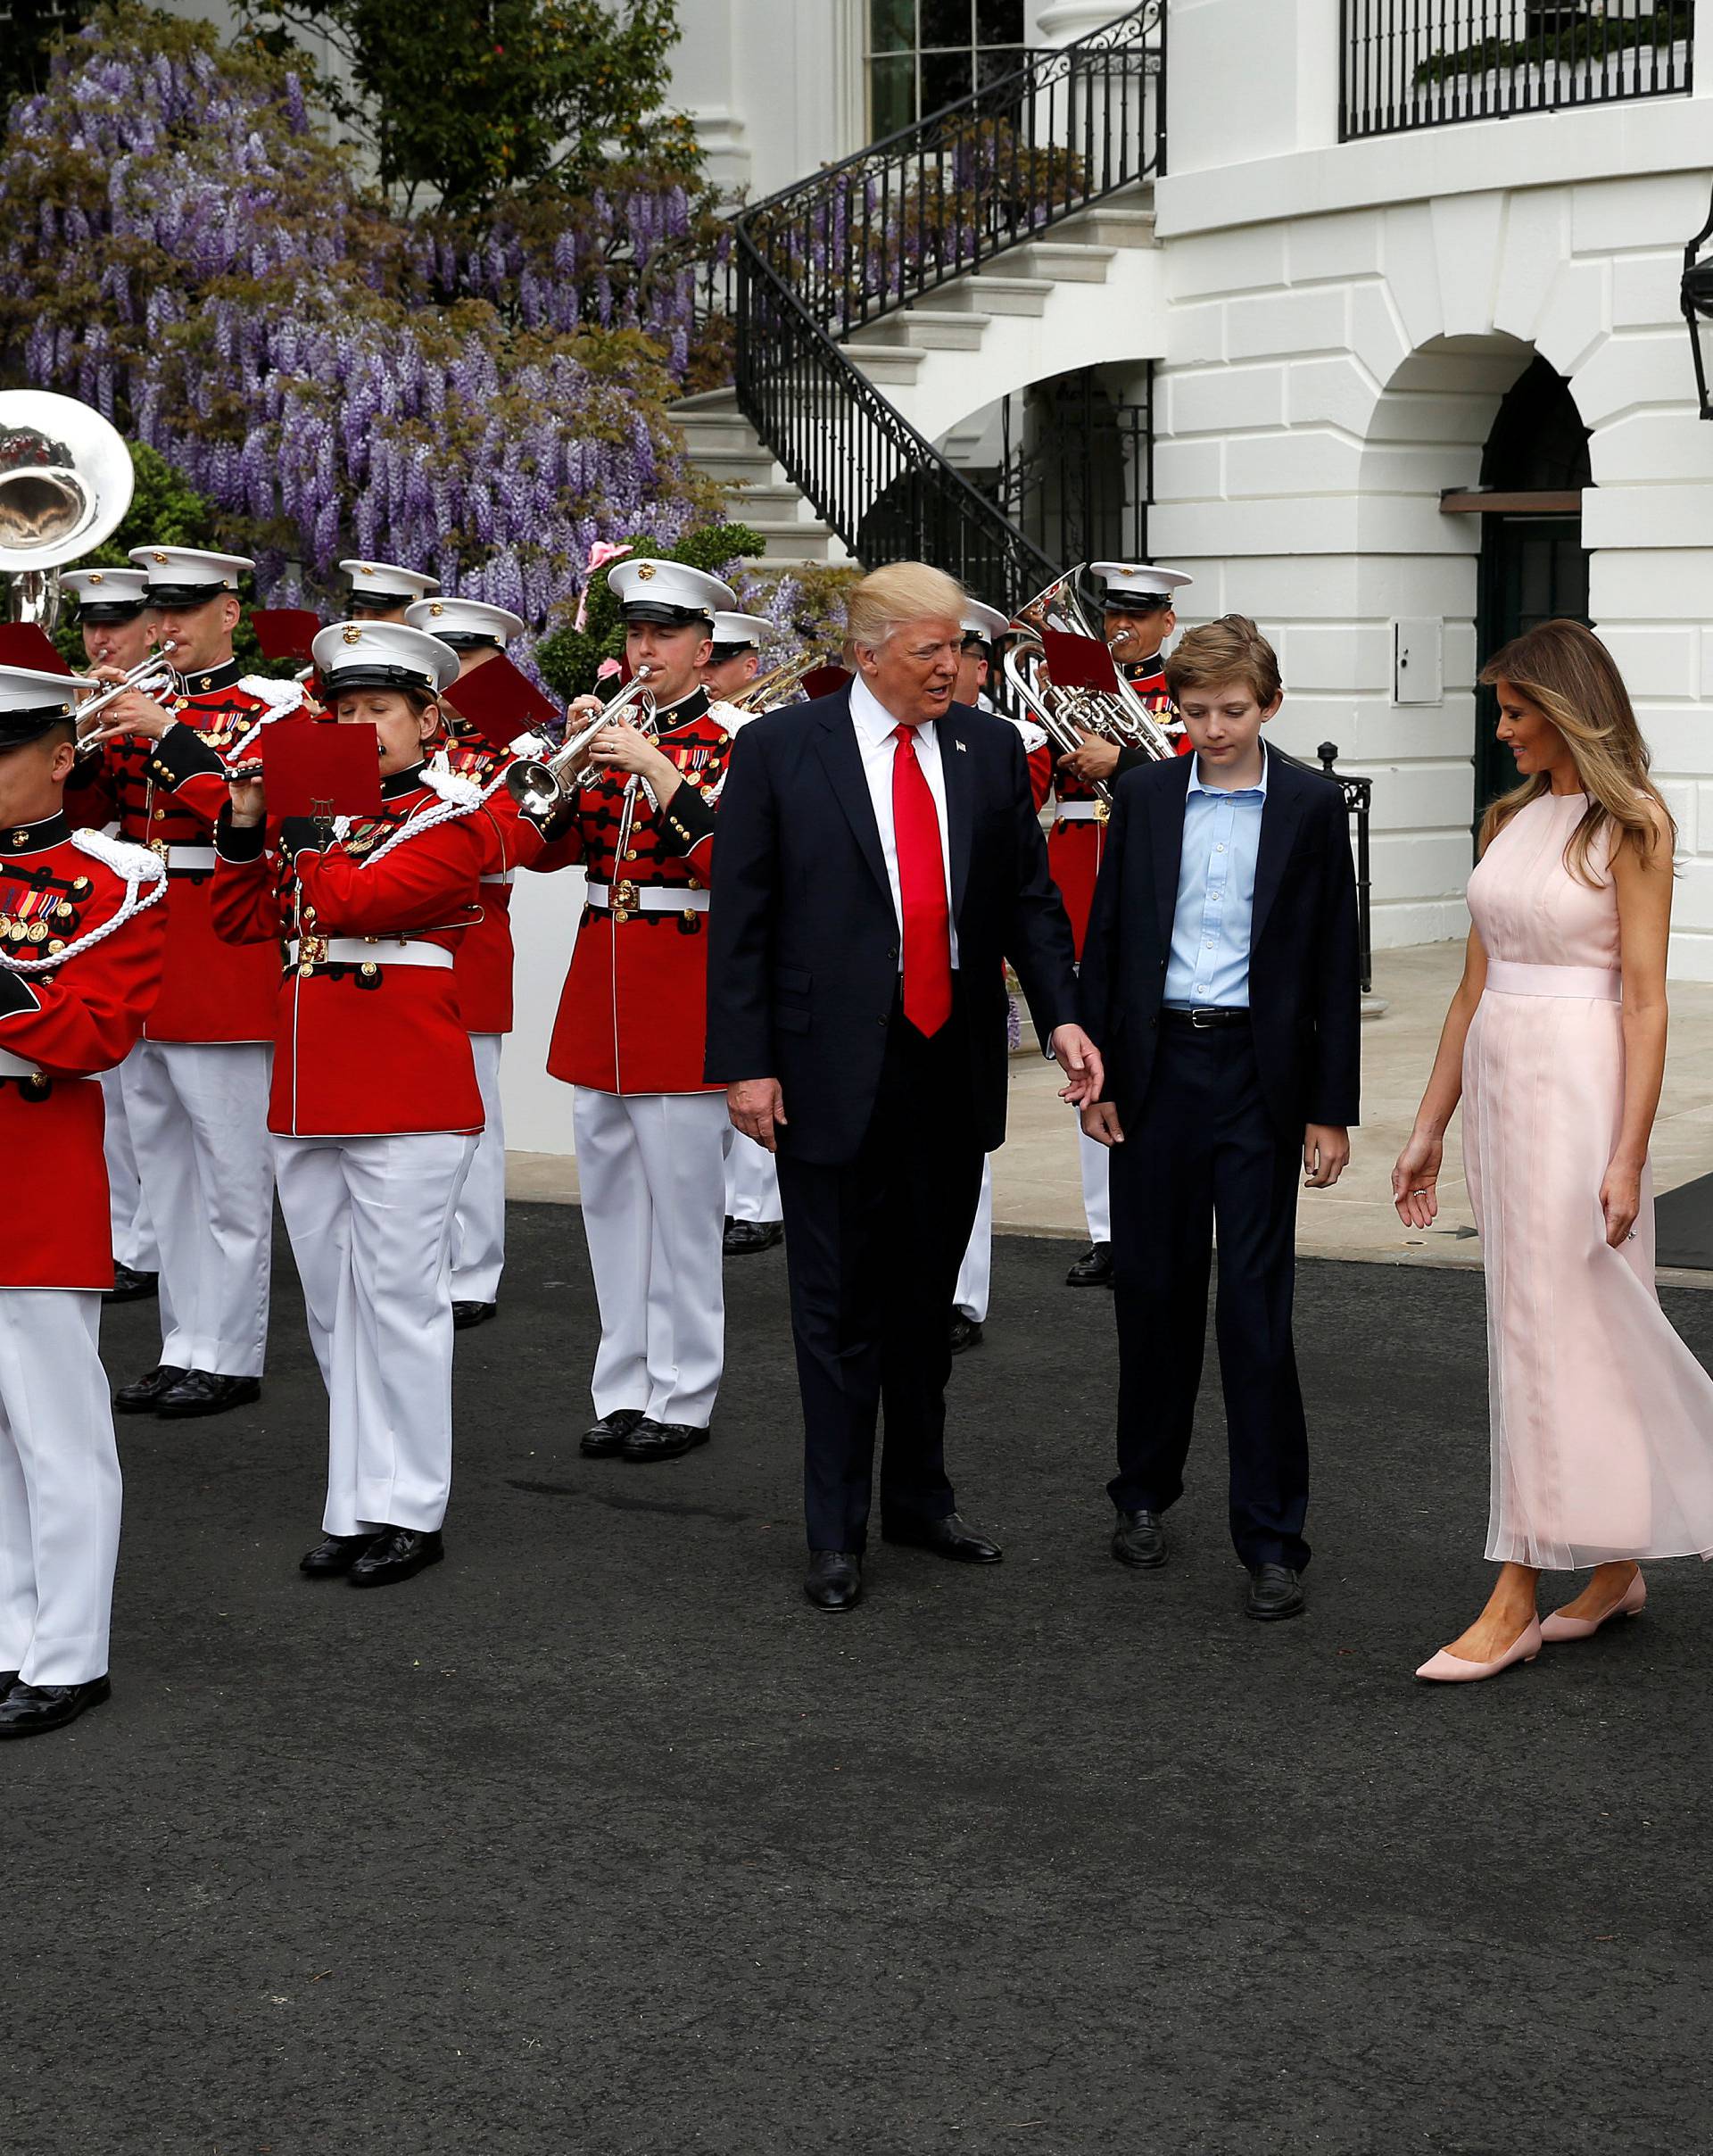 U.S. President Donald Trump, U.S. first lady Melania Trump and the their son Barron listen as a military band plays during the 139th annual White House Easter Egg Roll on the South Lawn of the White House in Washington